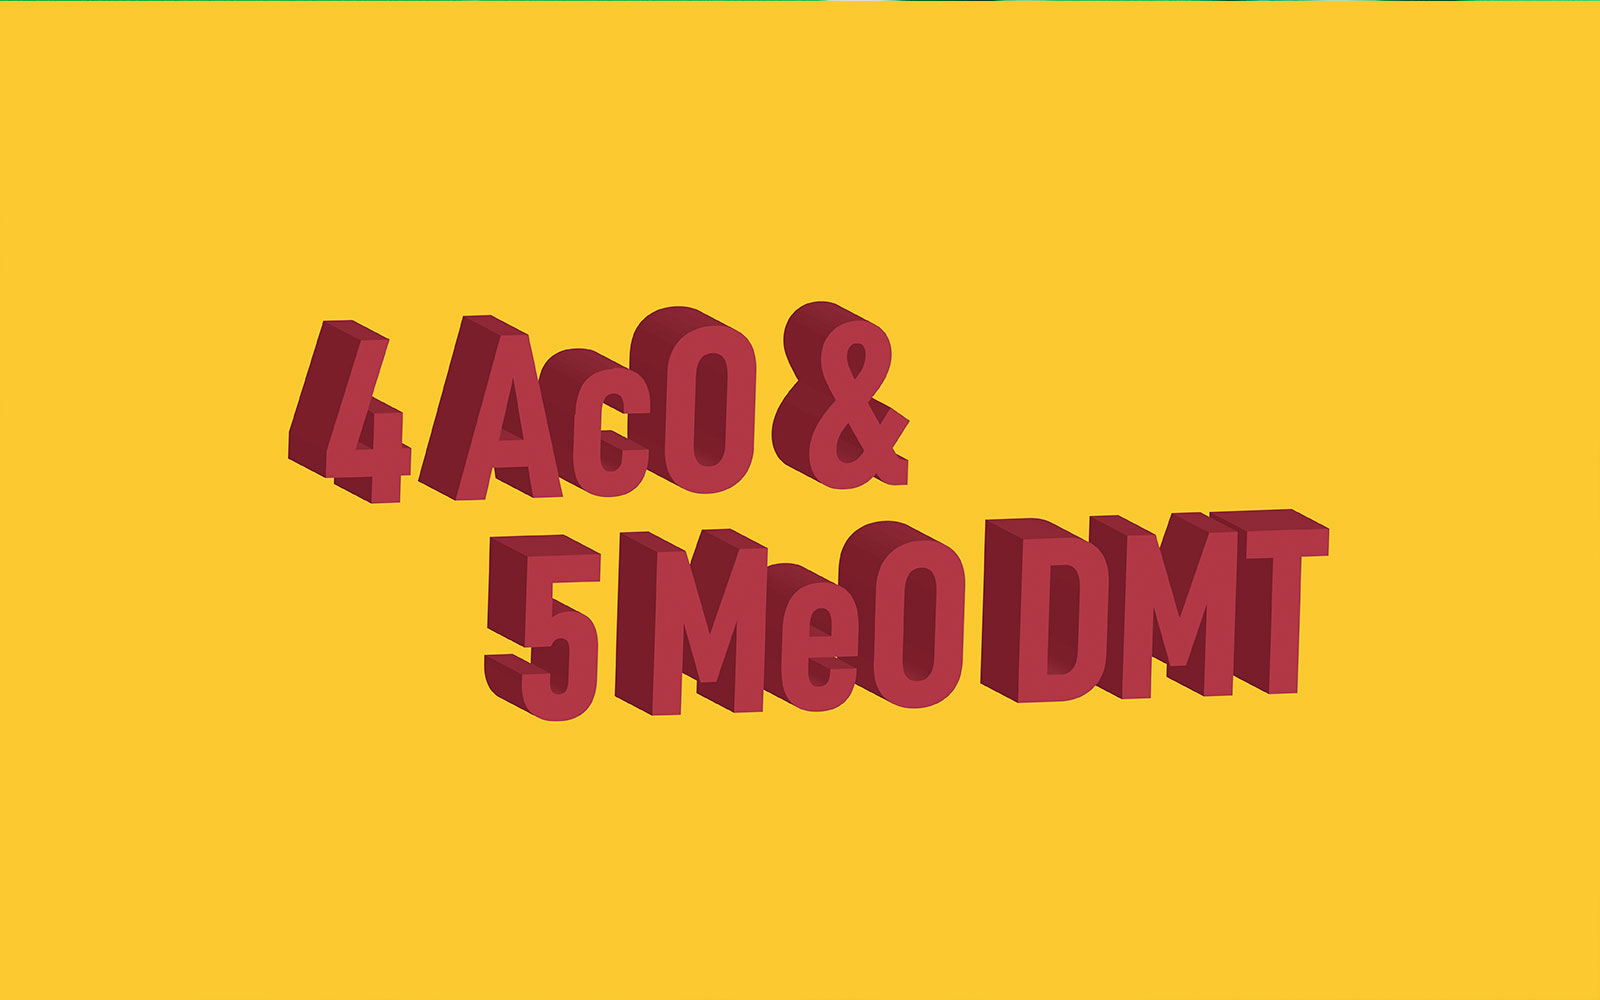 4 AcO DMT & 5 MeO DMT: What to Know